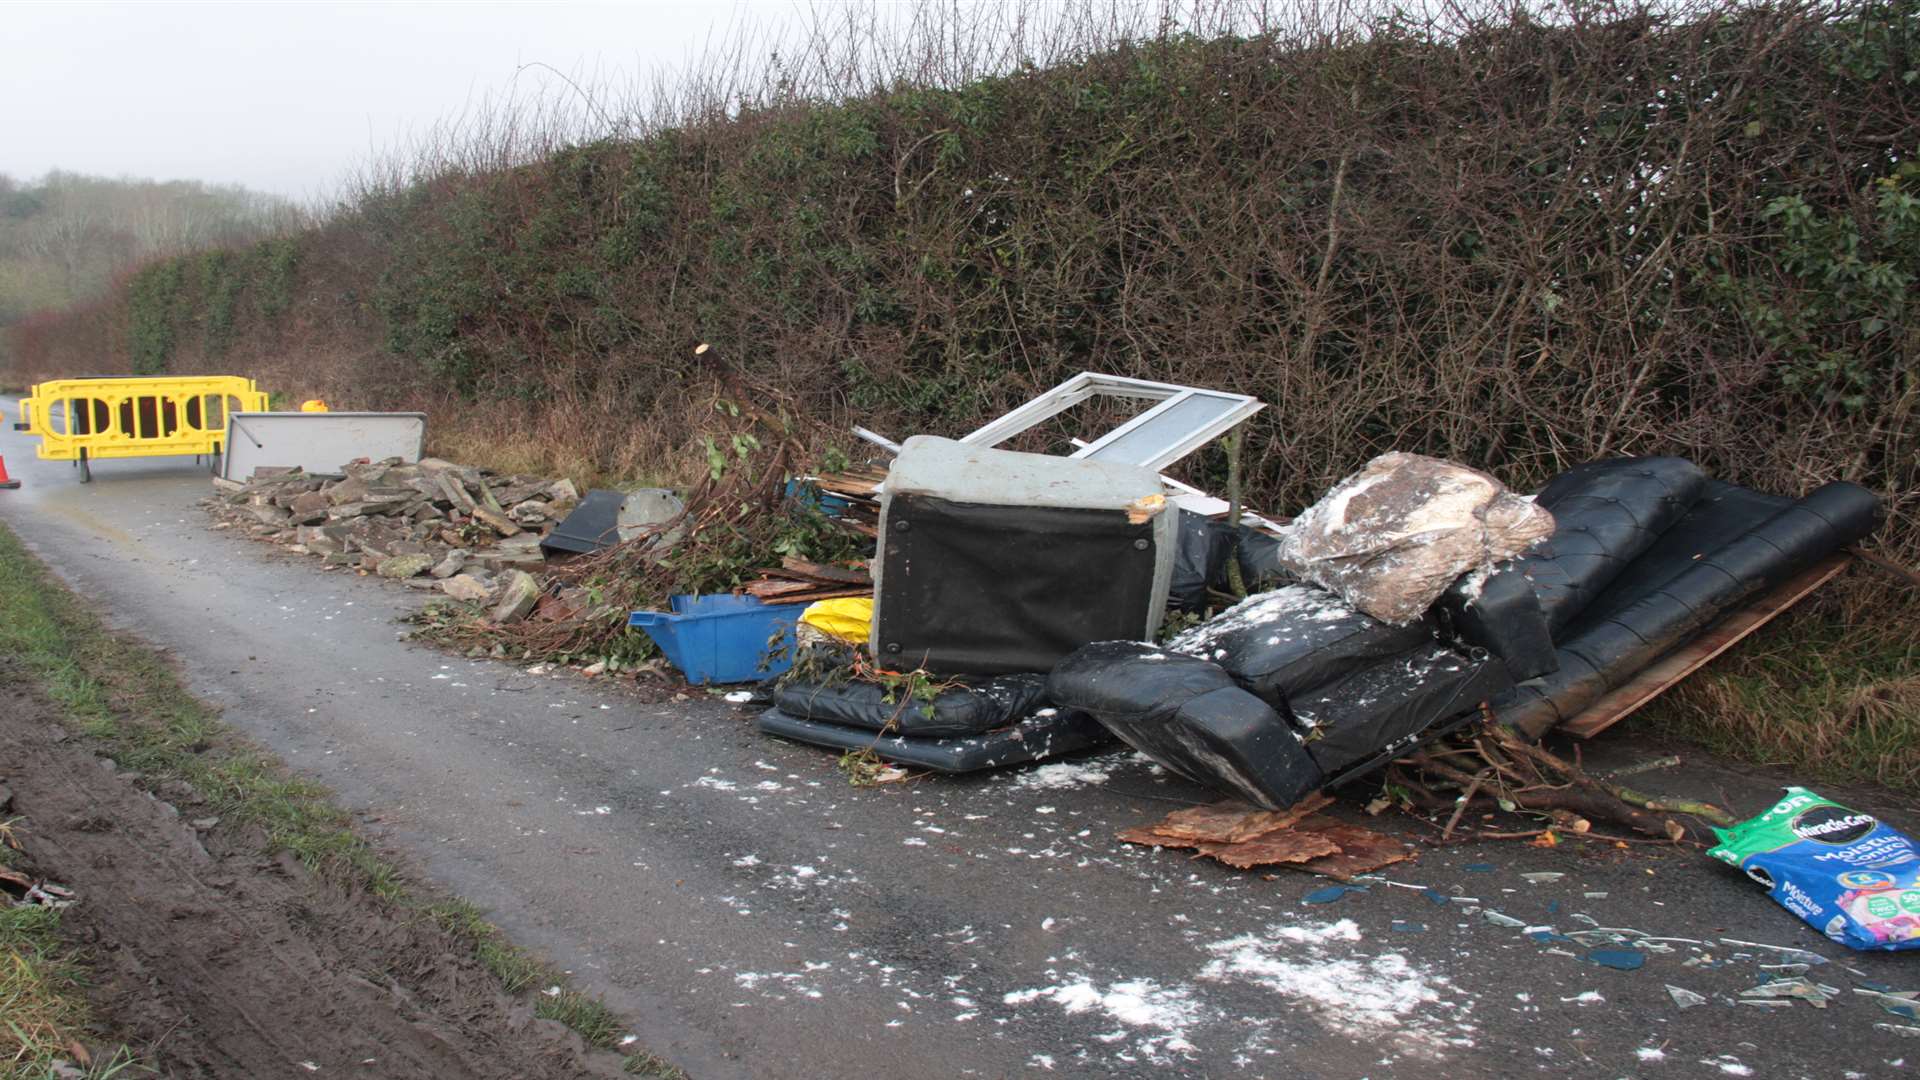 Furniture and rubble has been dumped in Pinesfield Lane, Trottisclife.